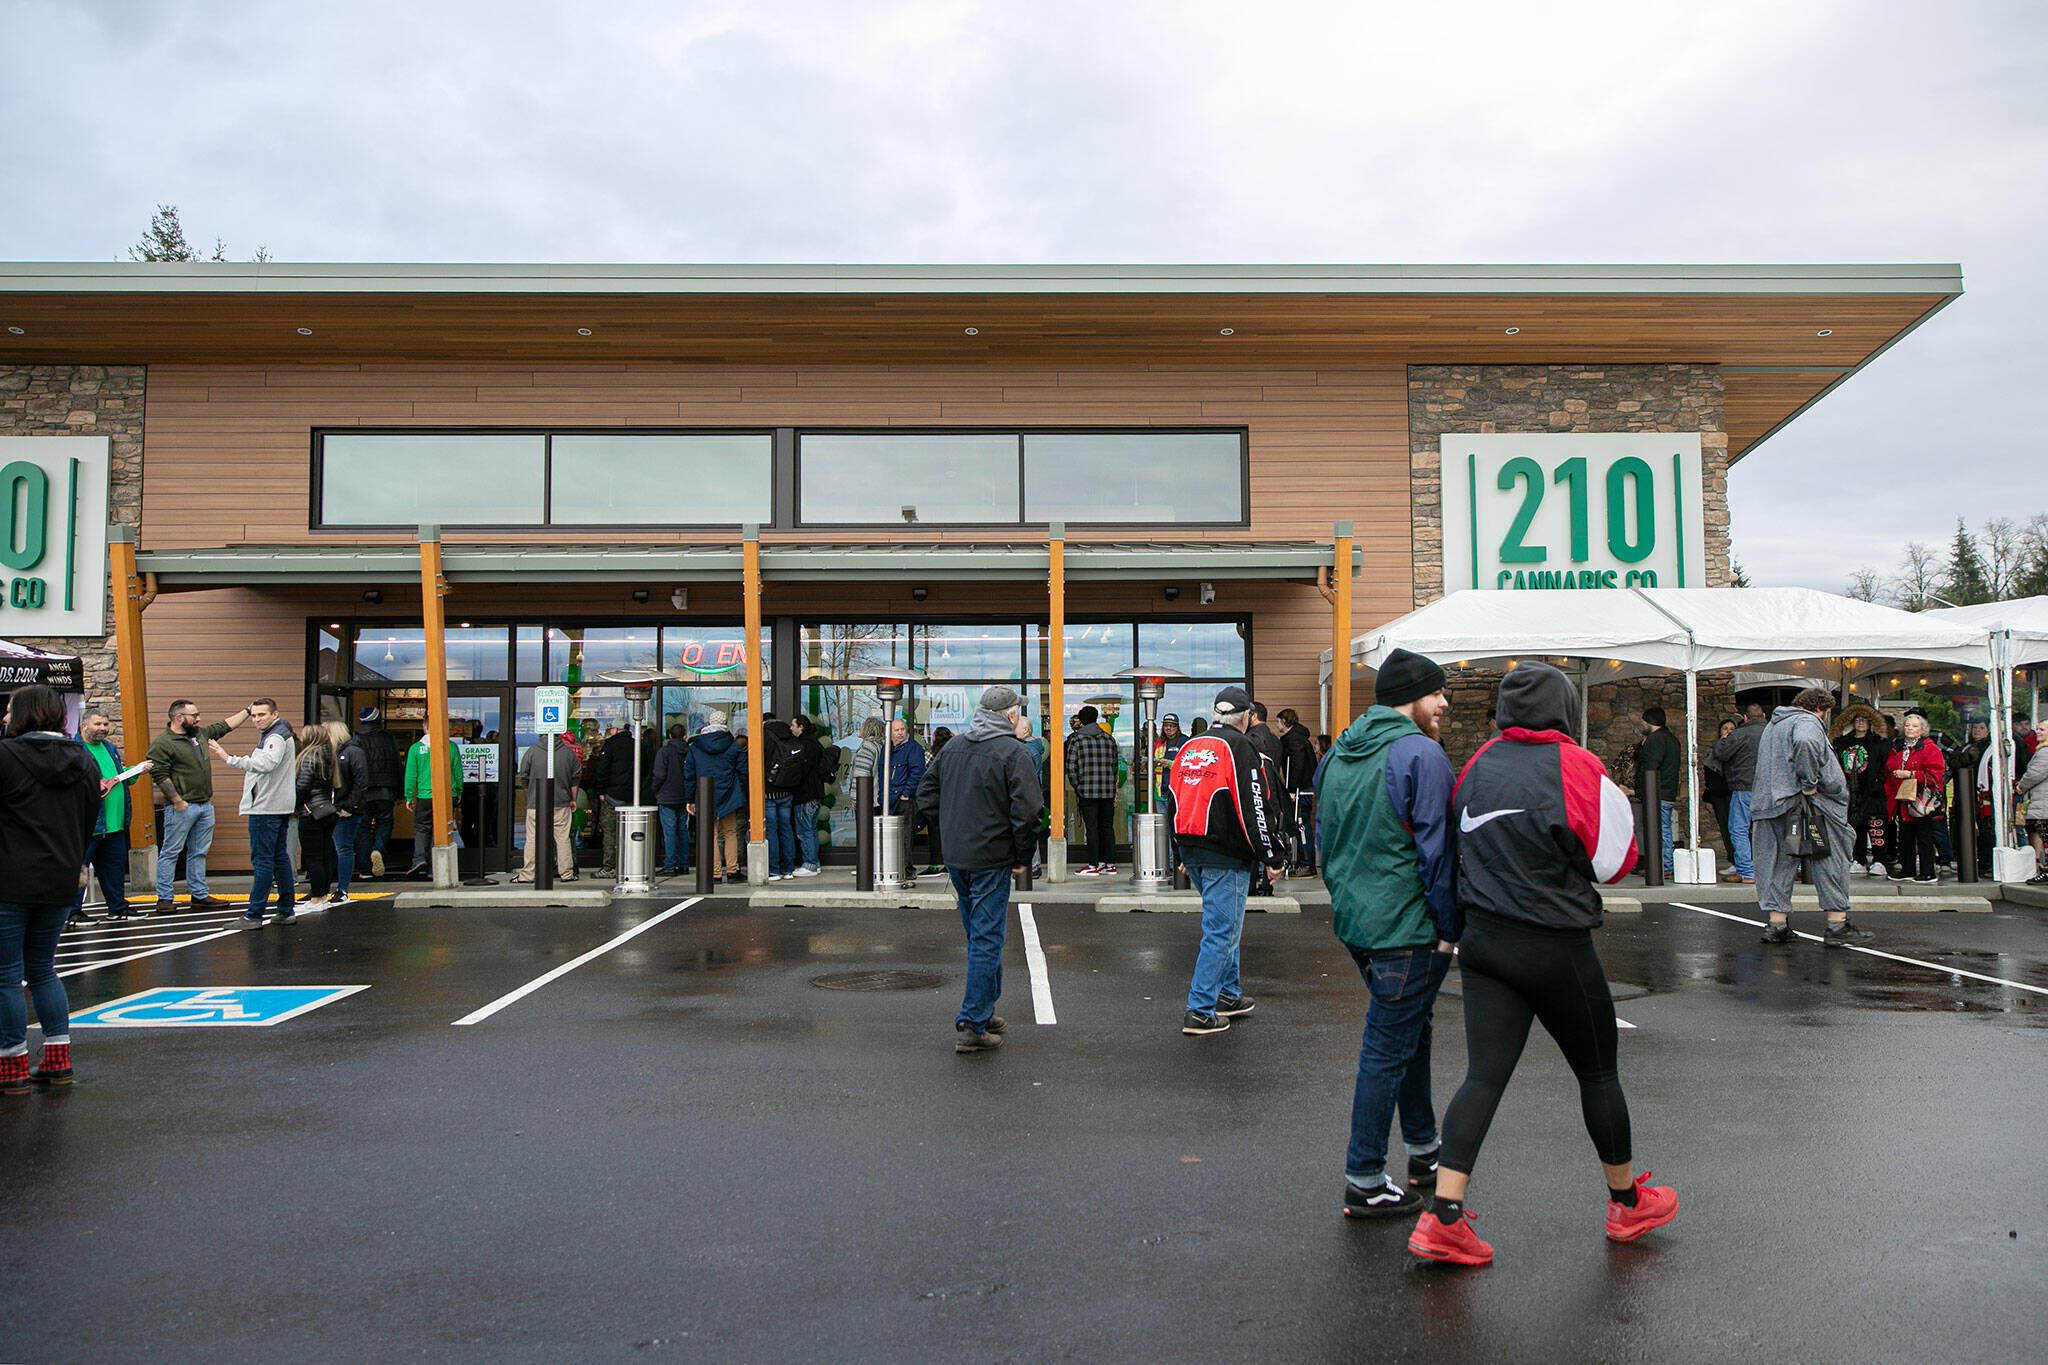 A line already wrapped around the building continues to grow as people arrive during 210 Cannabis Co’s grand opening Dec. 10, in Arlington. (Ryan Berry / The Herald)